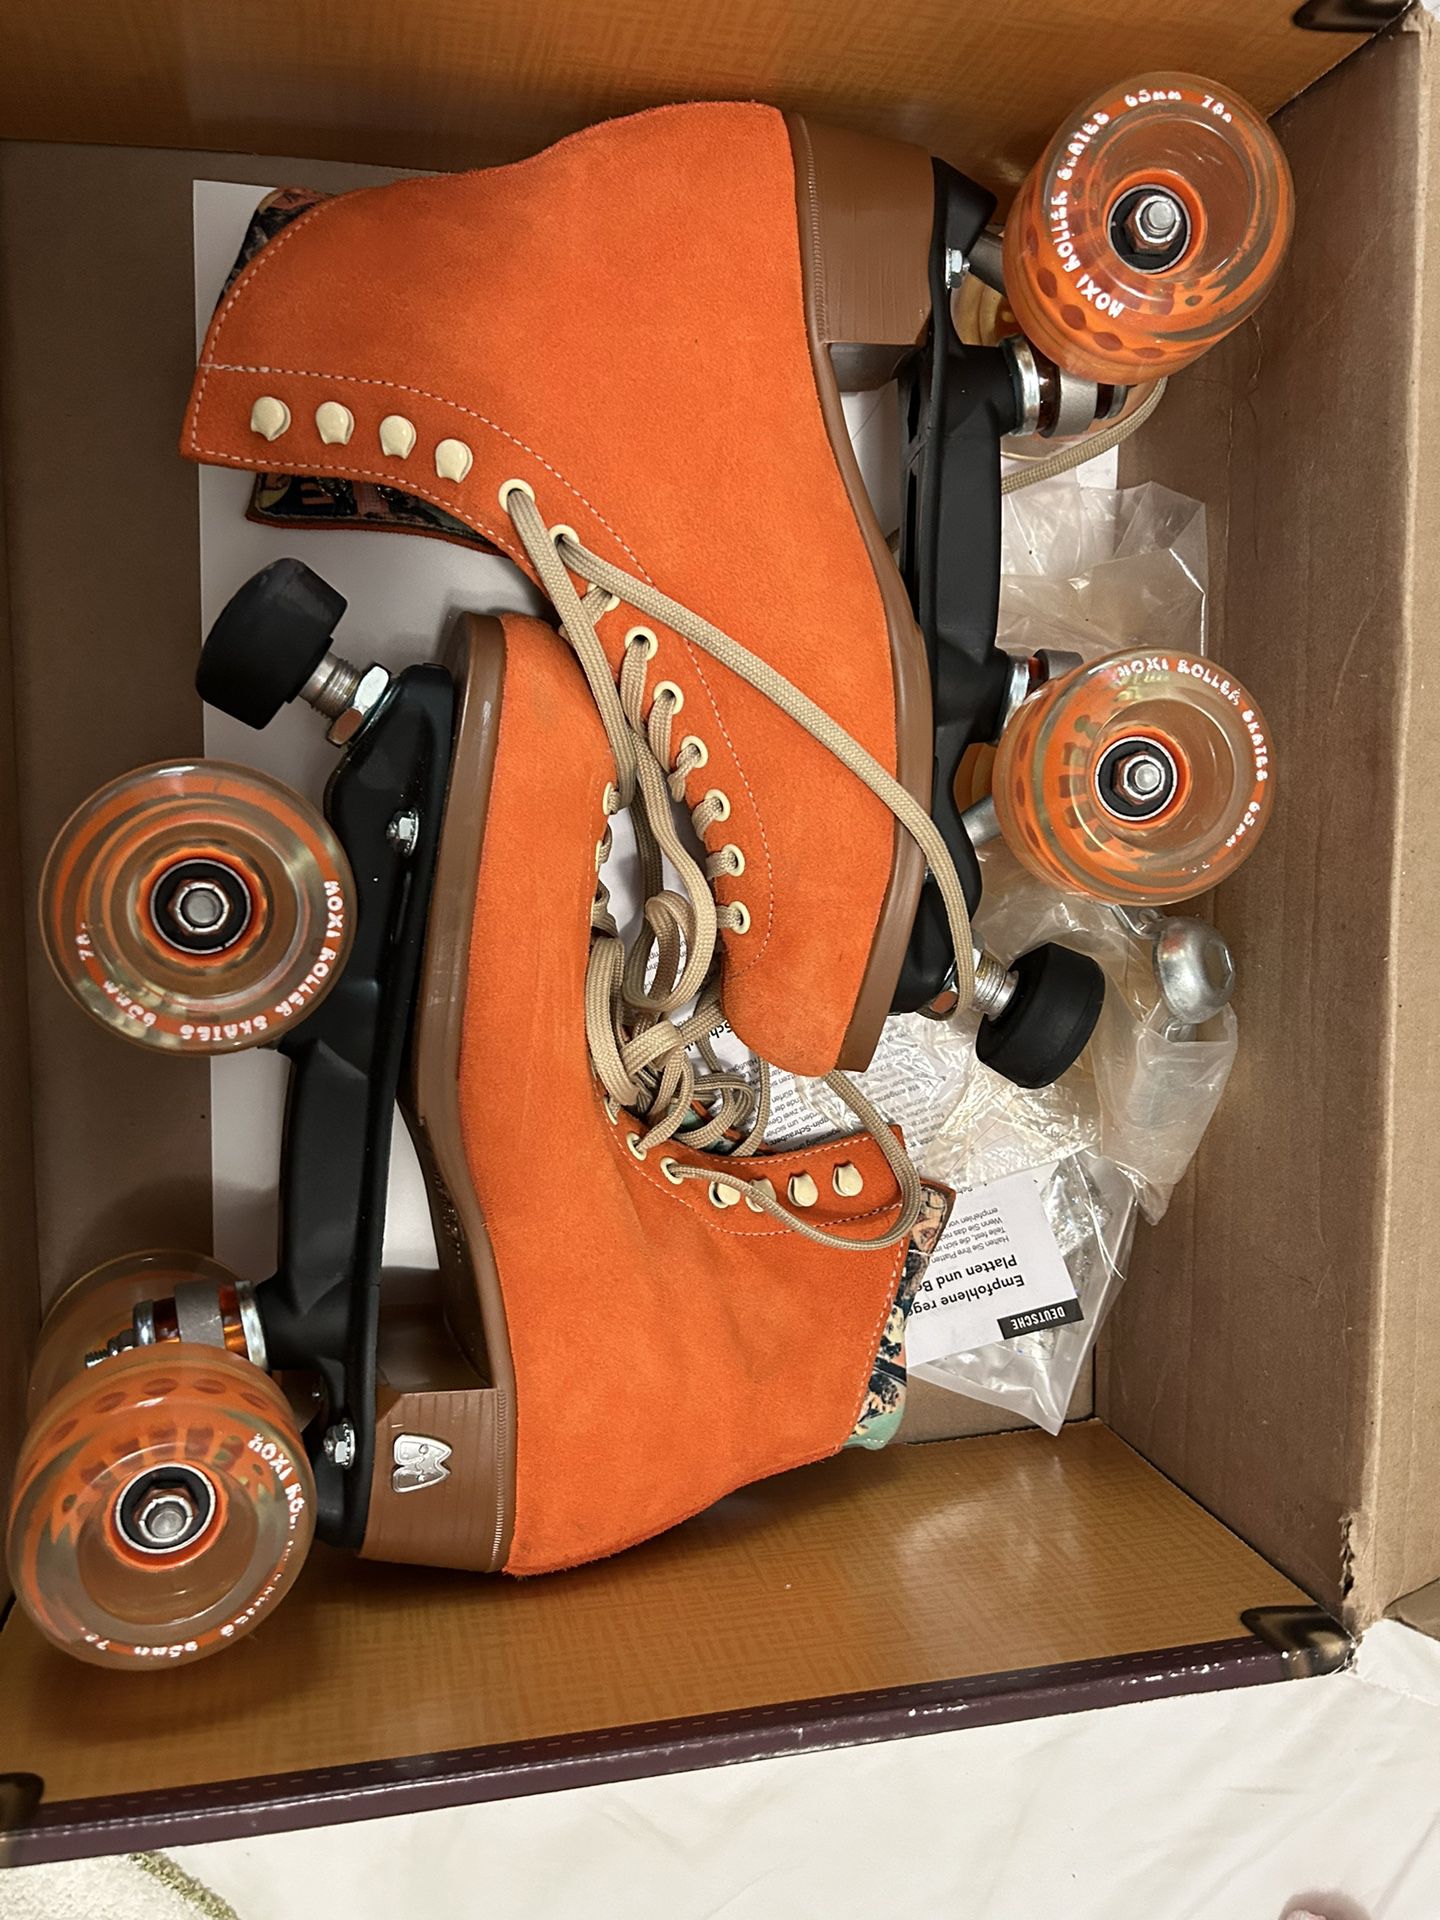 Discontinued Moxie Roller Skates 